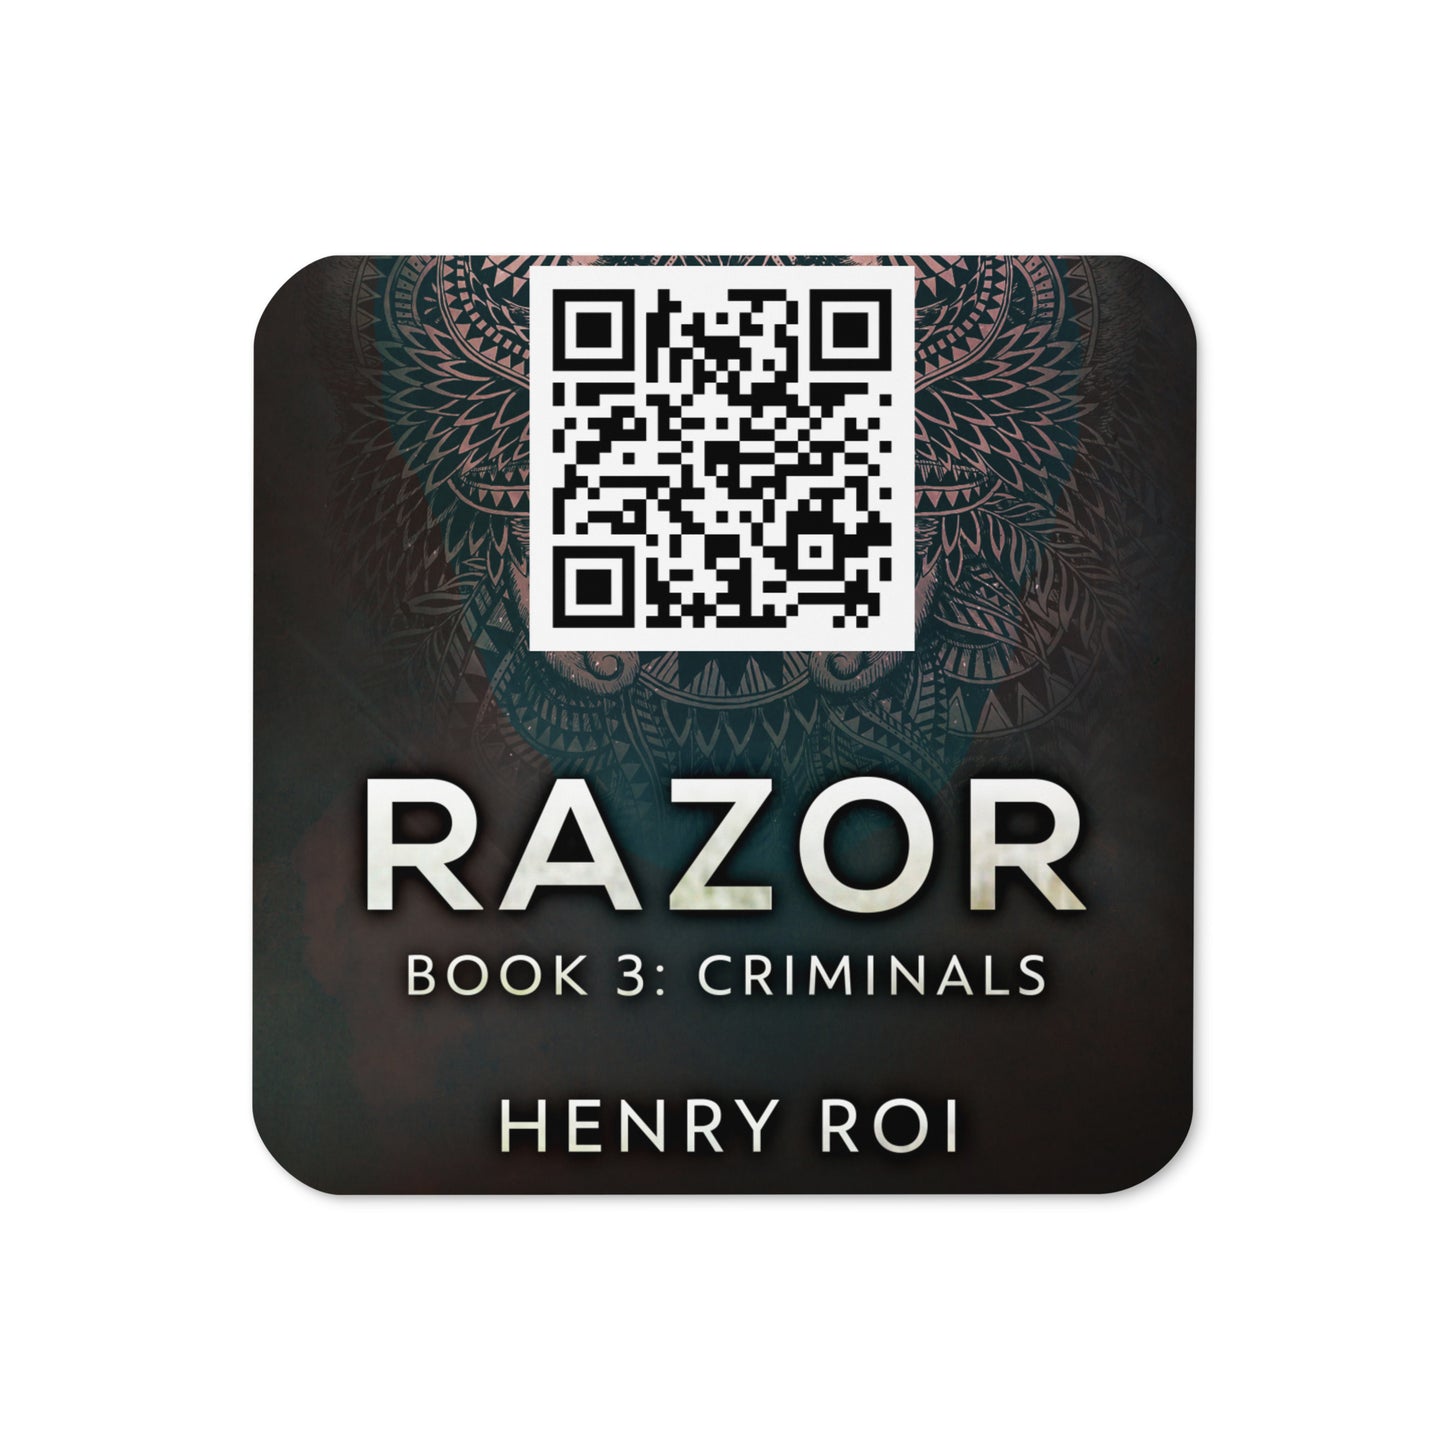 coaster with cover art from Henry Roi's book Criminals